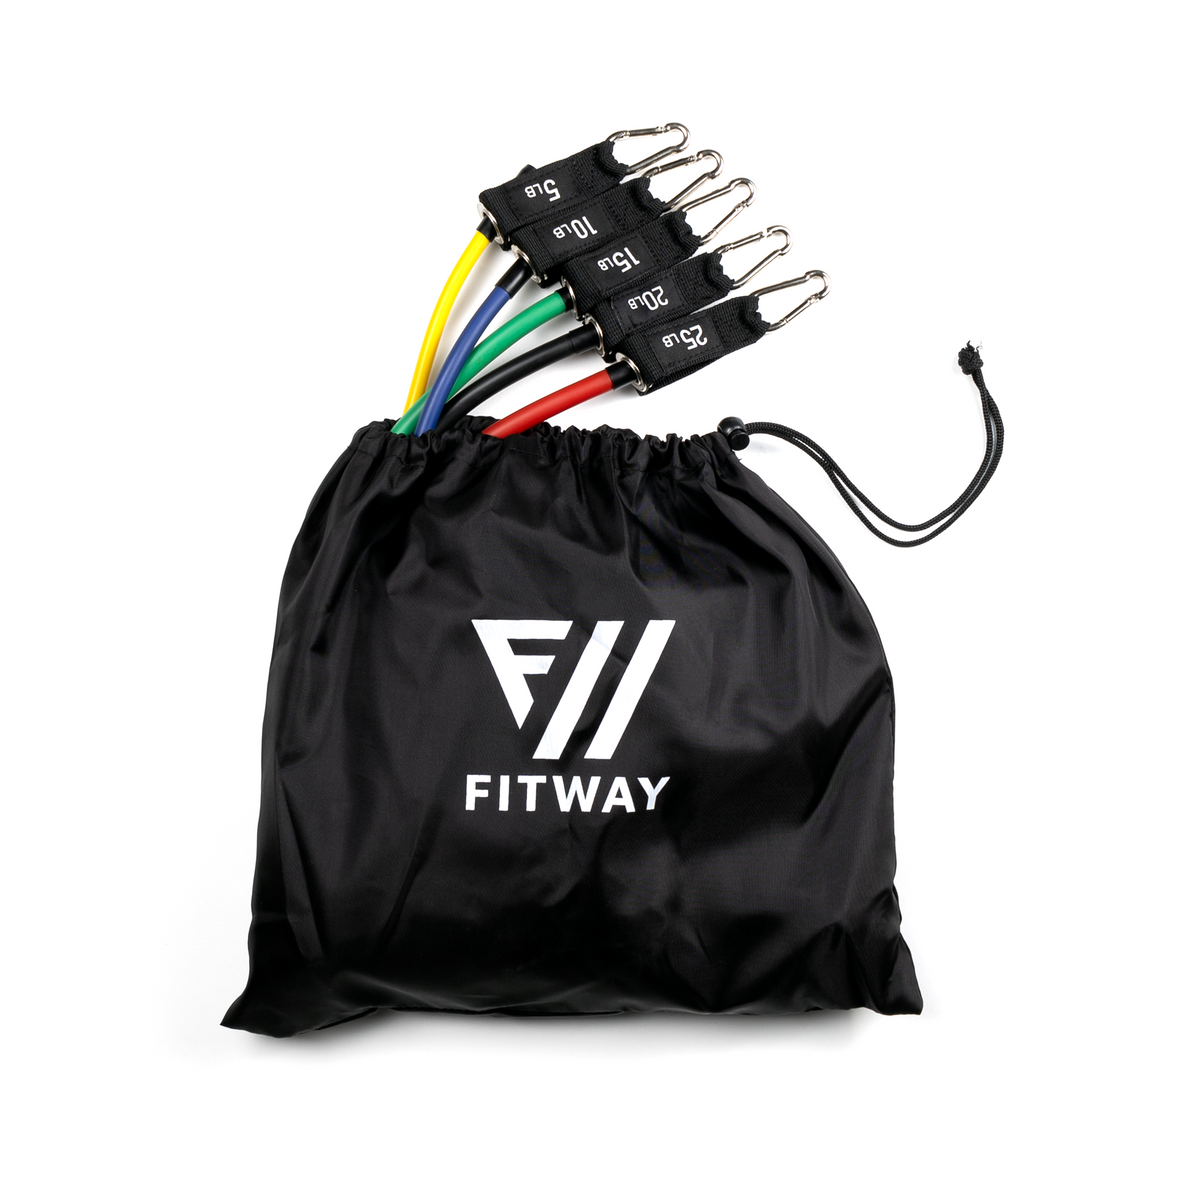 FitWay Equip Fitway 12 piece Resistance Training System 